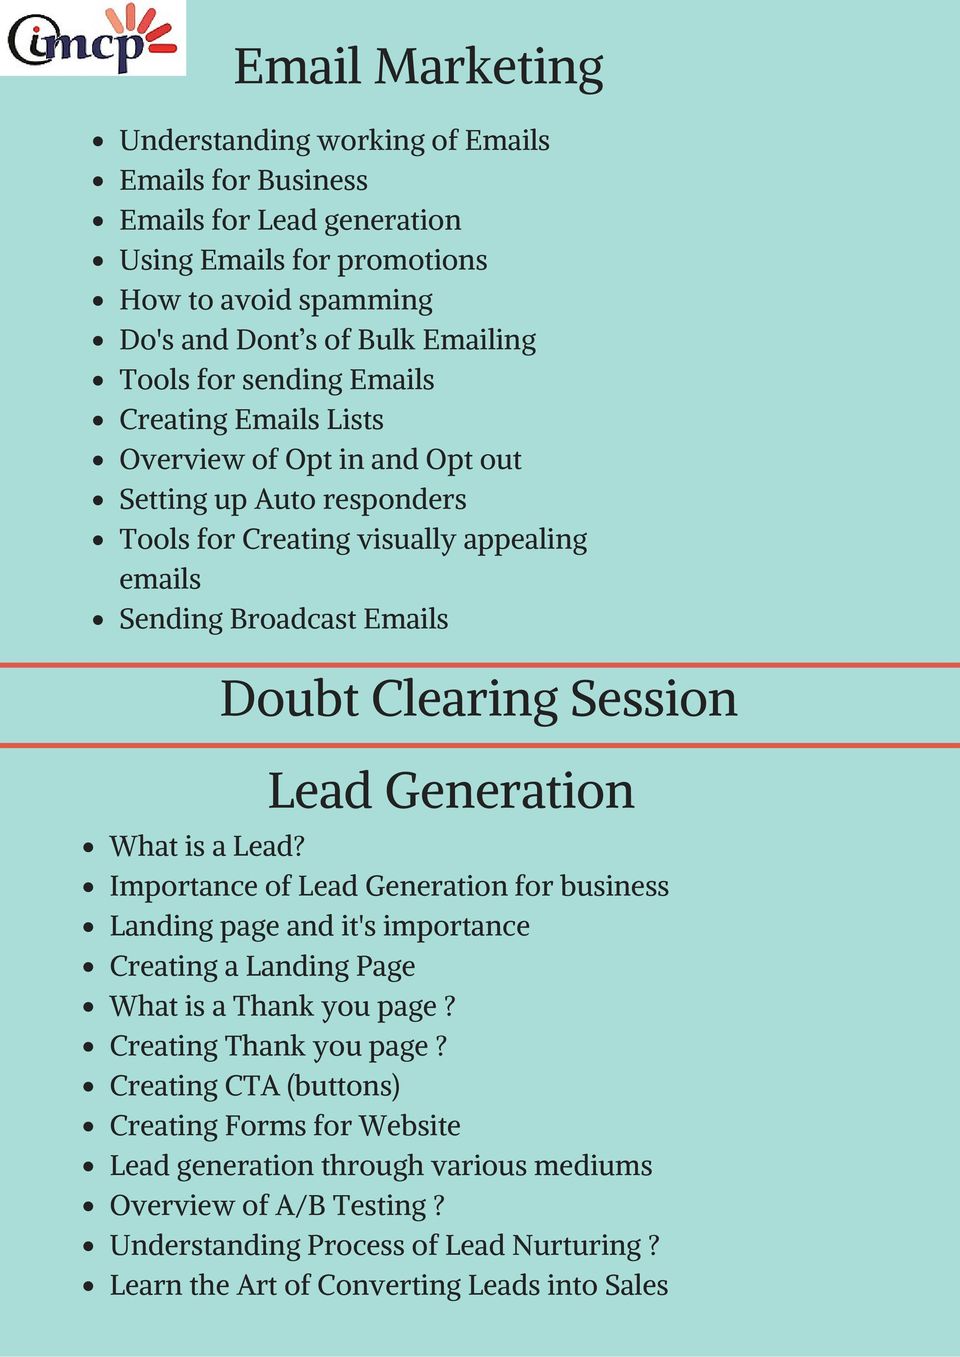 Lead Generation What is a Lead? Importance of Lead Generation for business Landing page and it's importance Creating a Landing Page What is a Thank you page? Creating Thank you page?